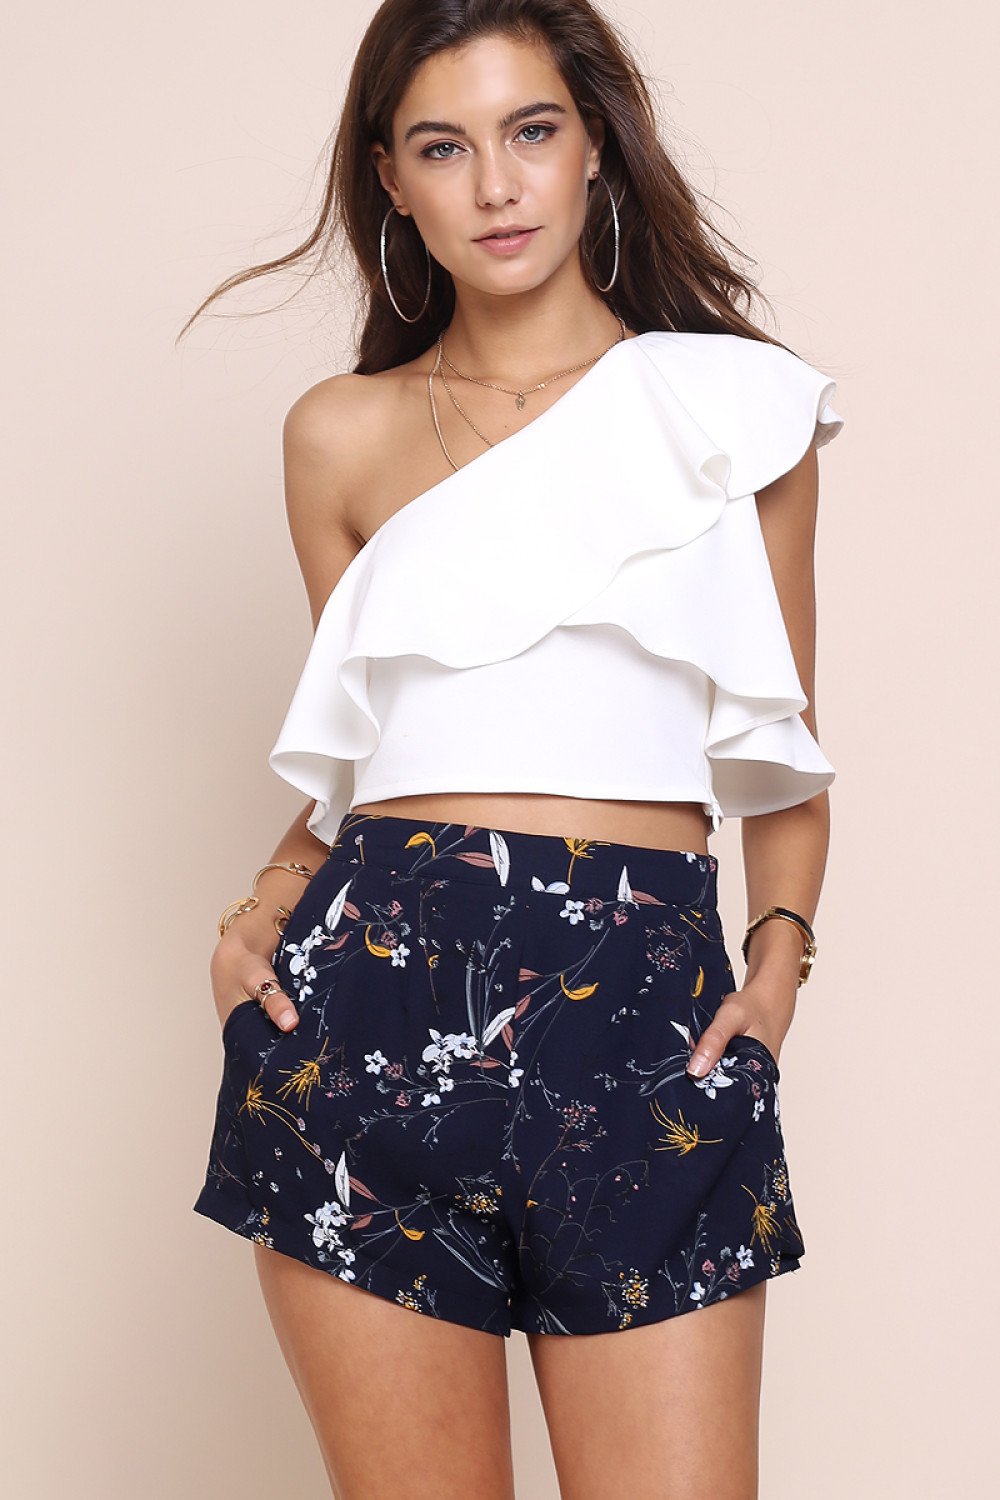 Floral Print High Waist Loose Polyester Shorts